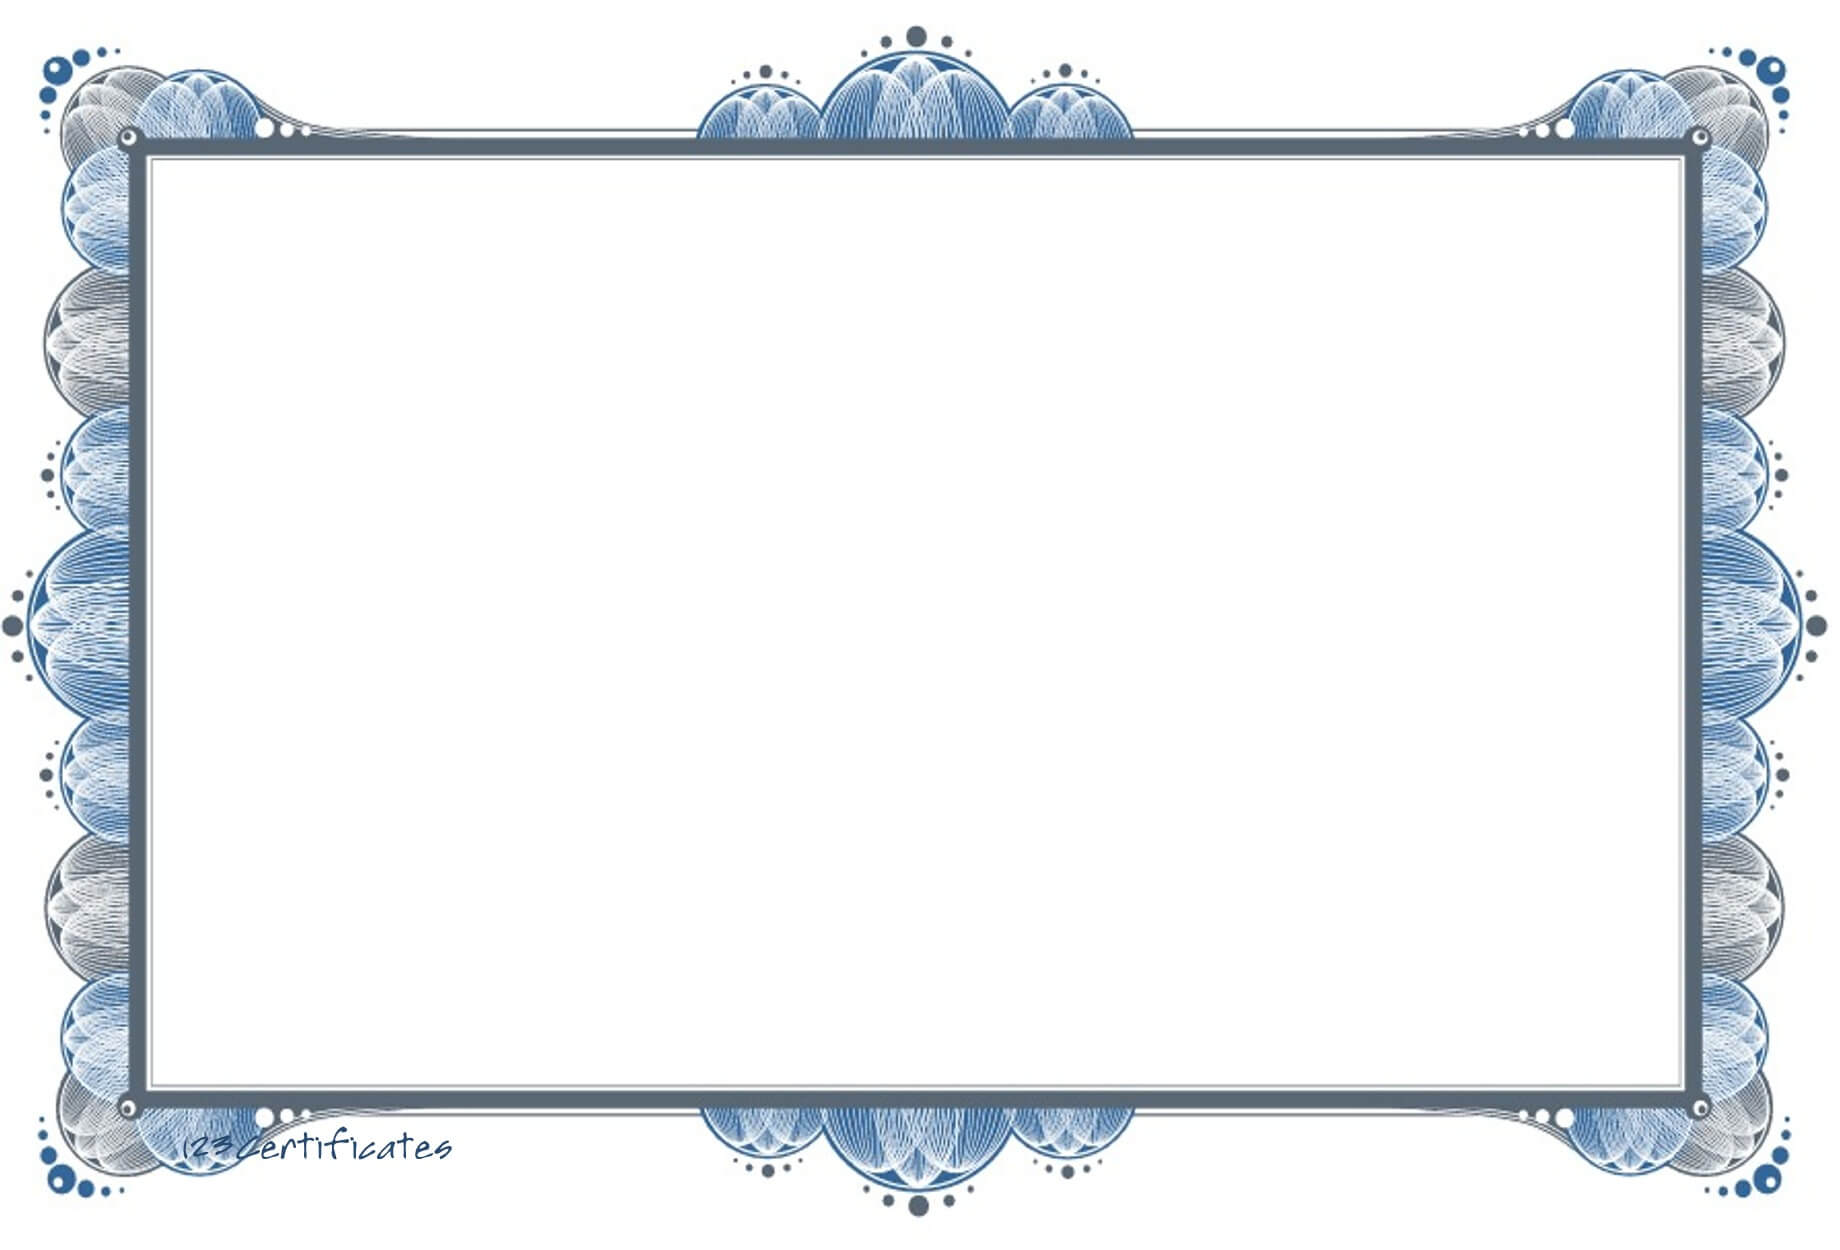 Free Certificate Borders, Download Free Clip Art, Free Clip For Certificate Border Design Templates